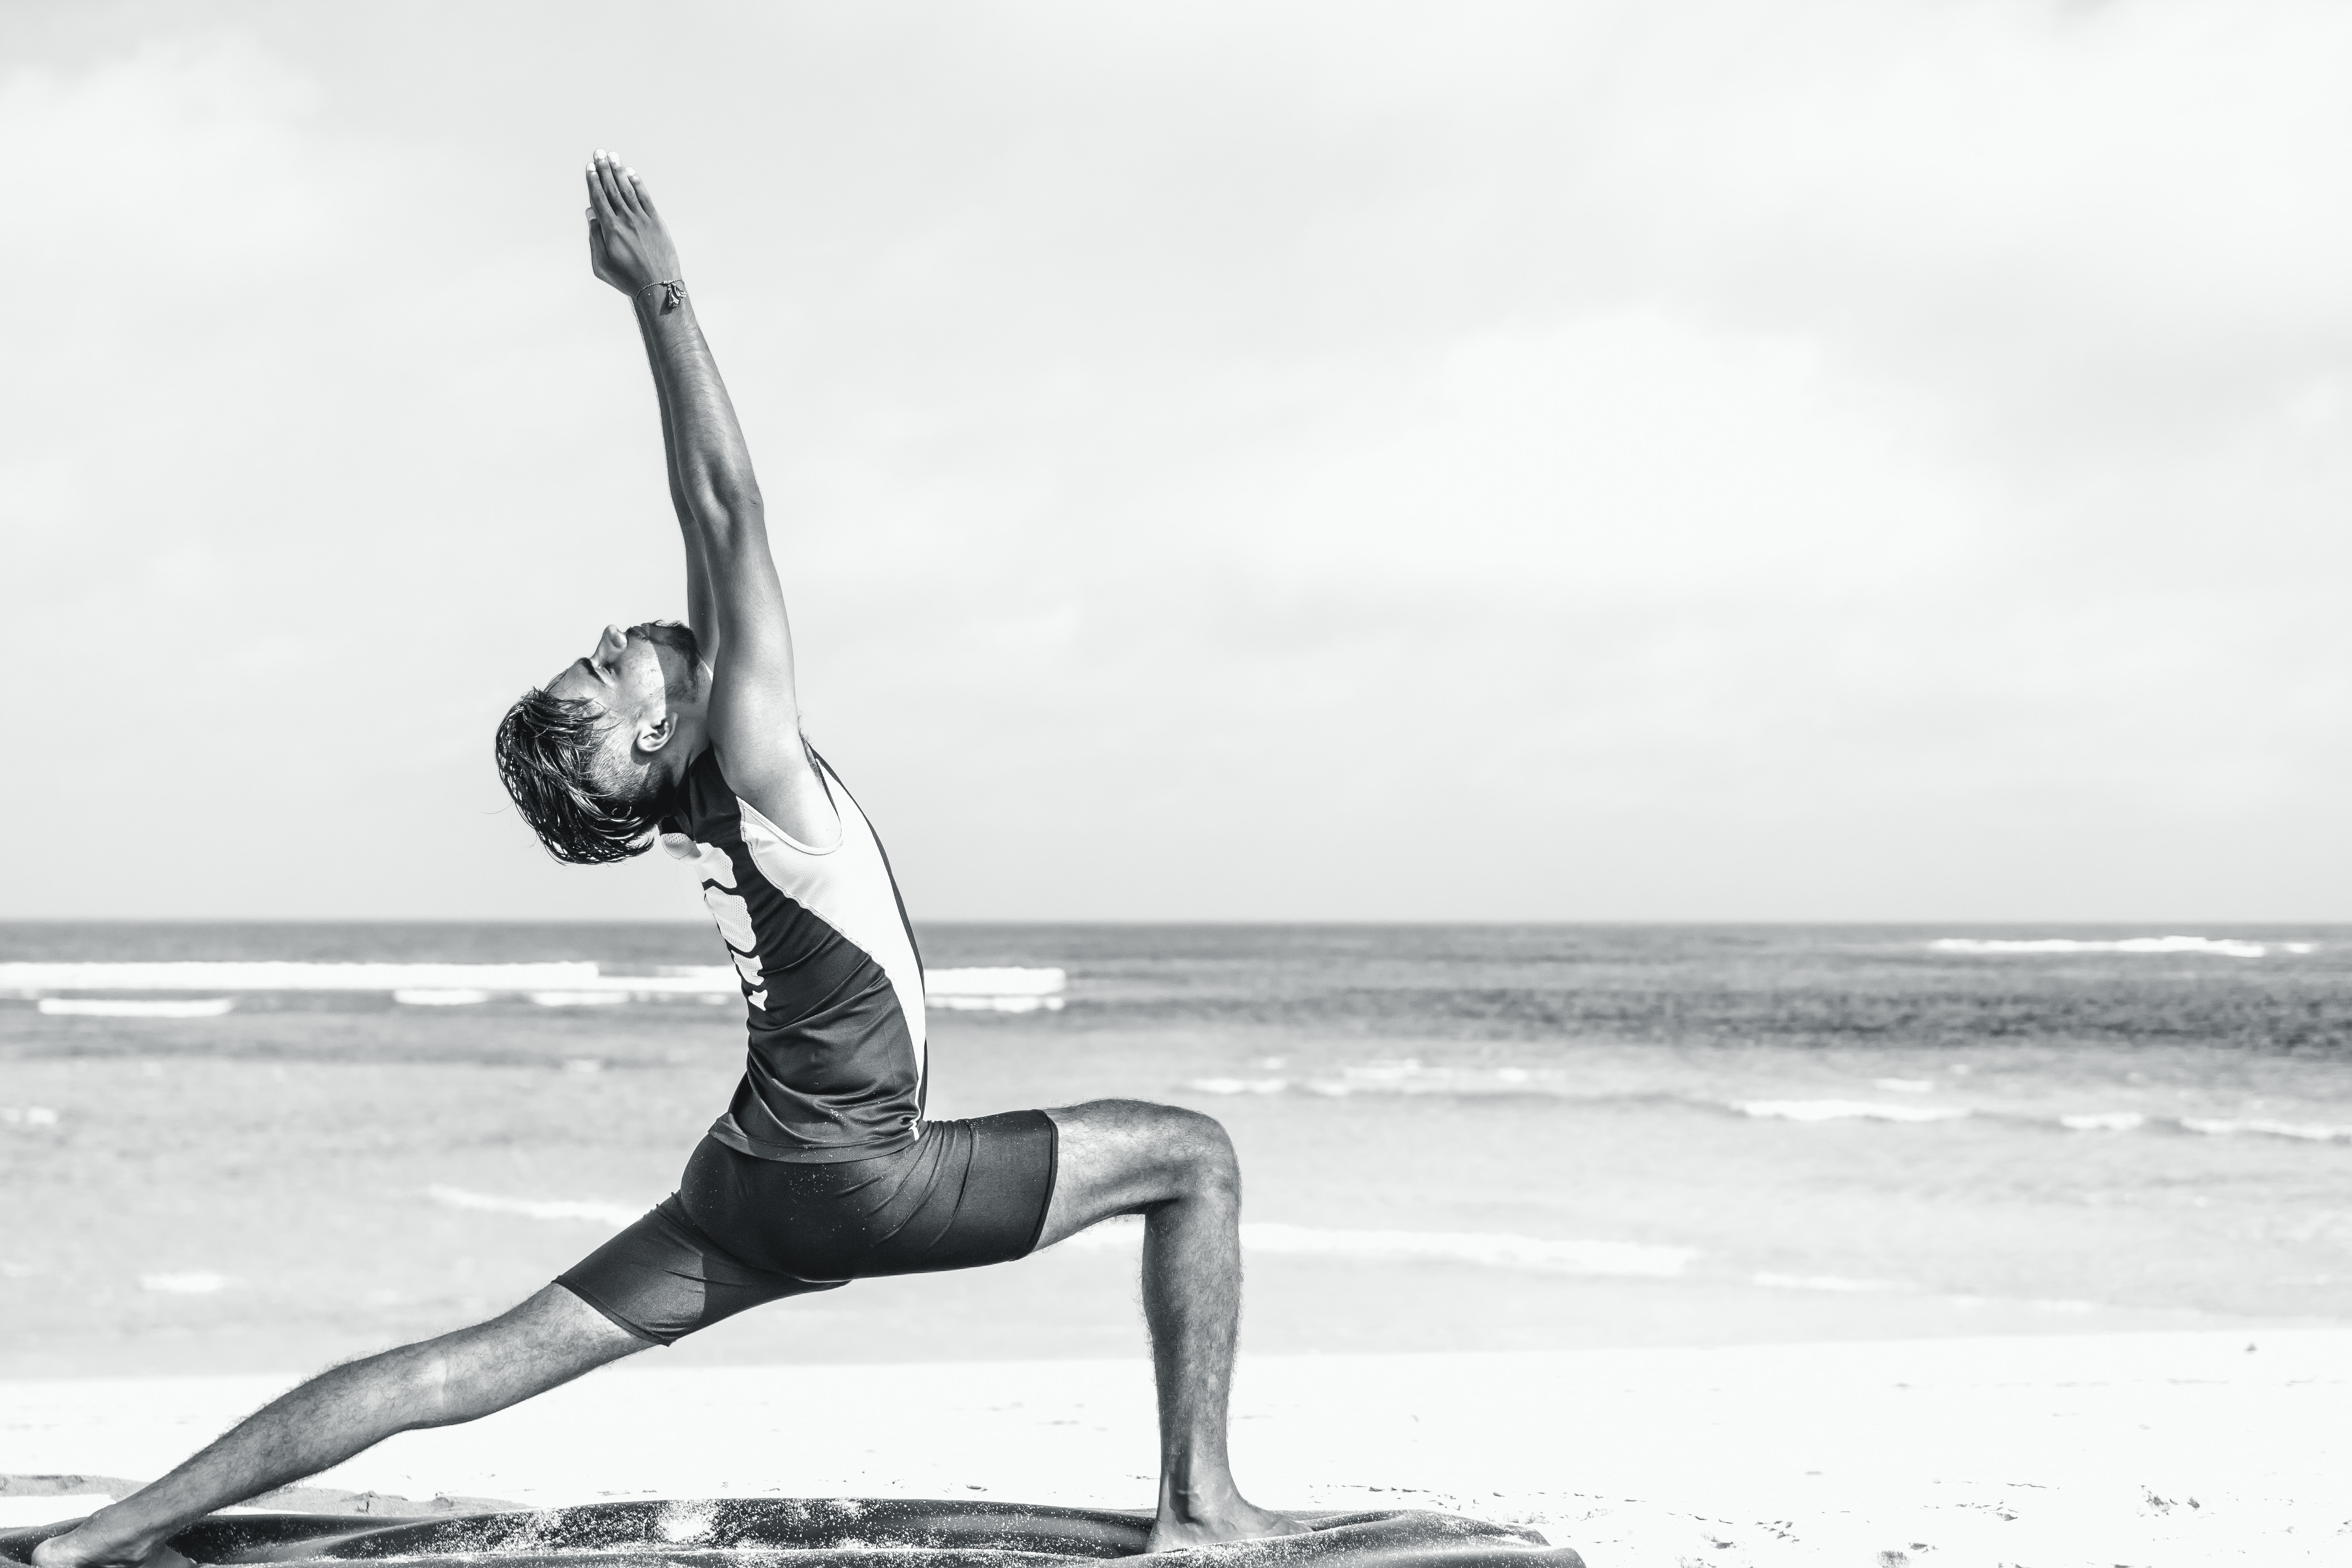 Best Beach Yoga Classes offered in San Diego